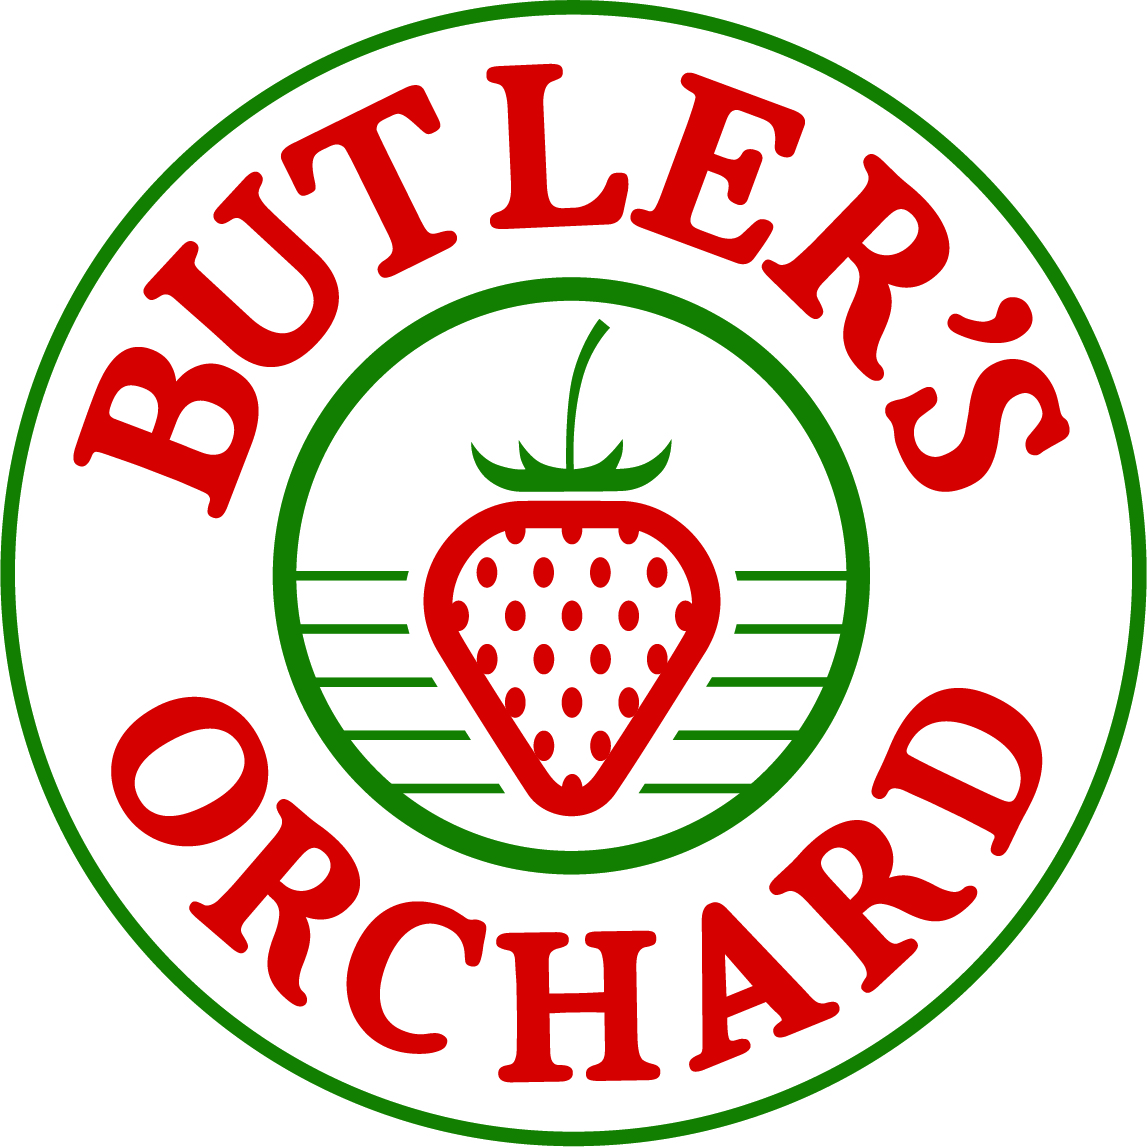 Butlers Orchard logo